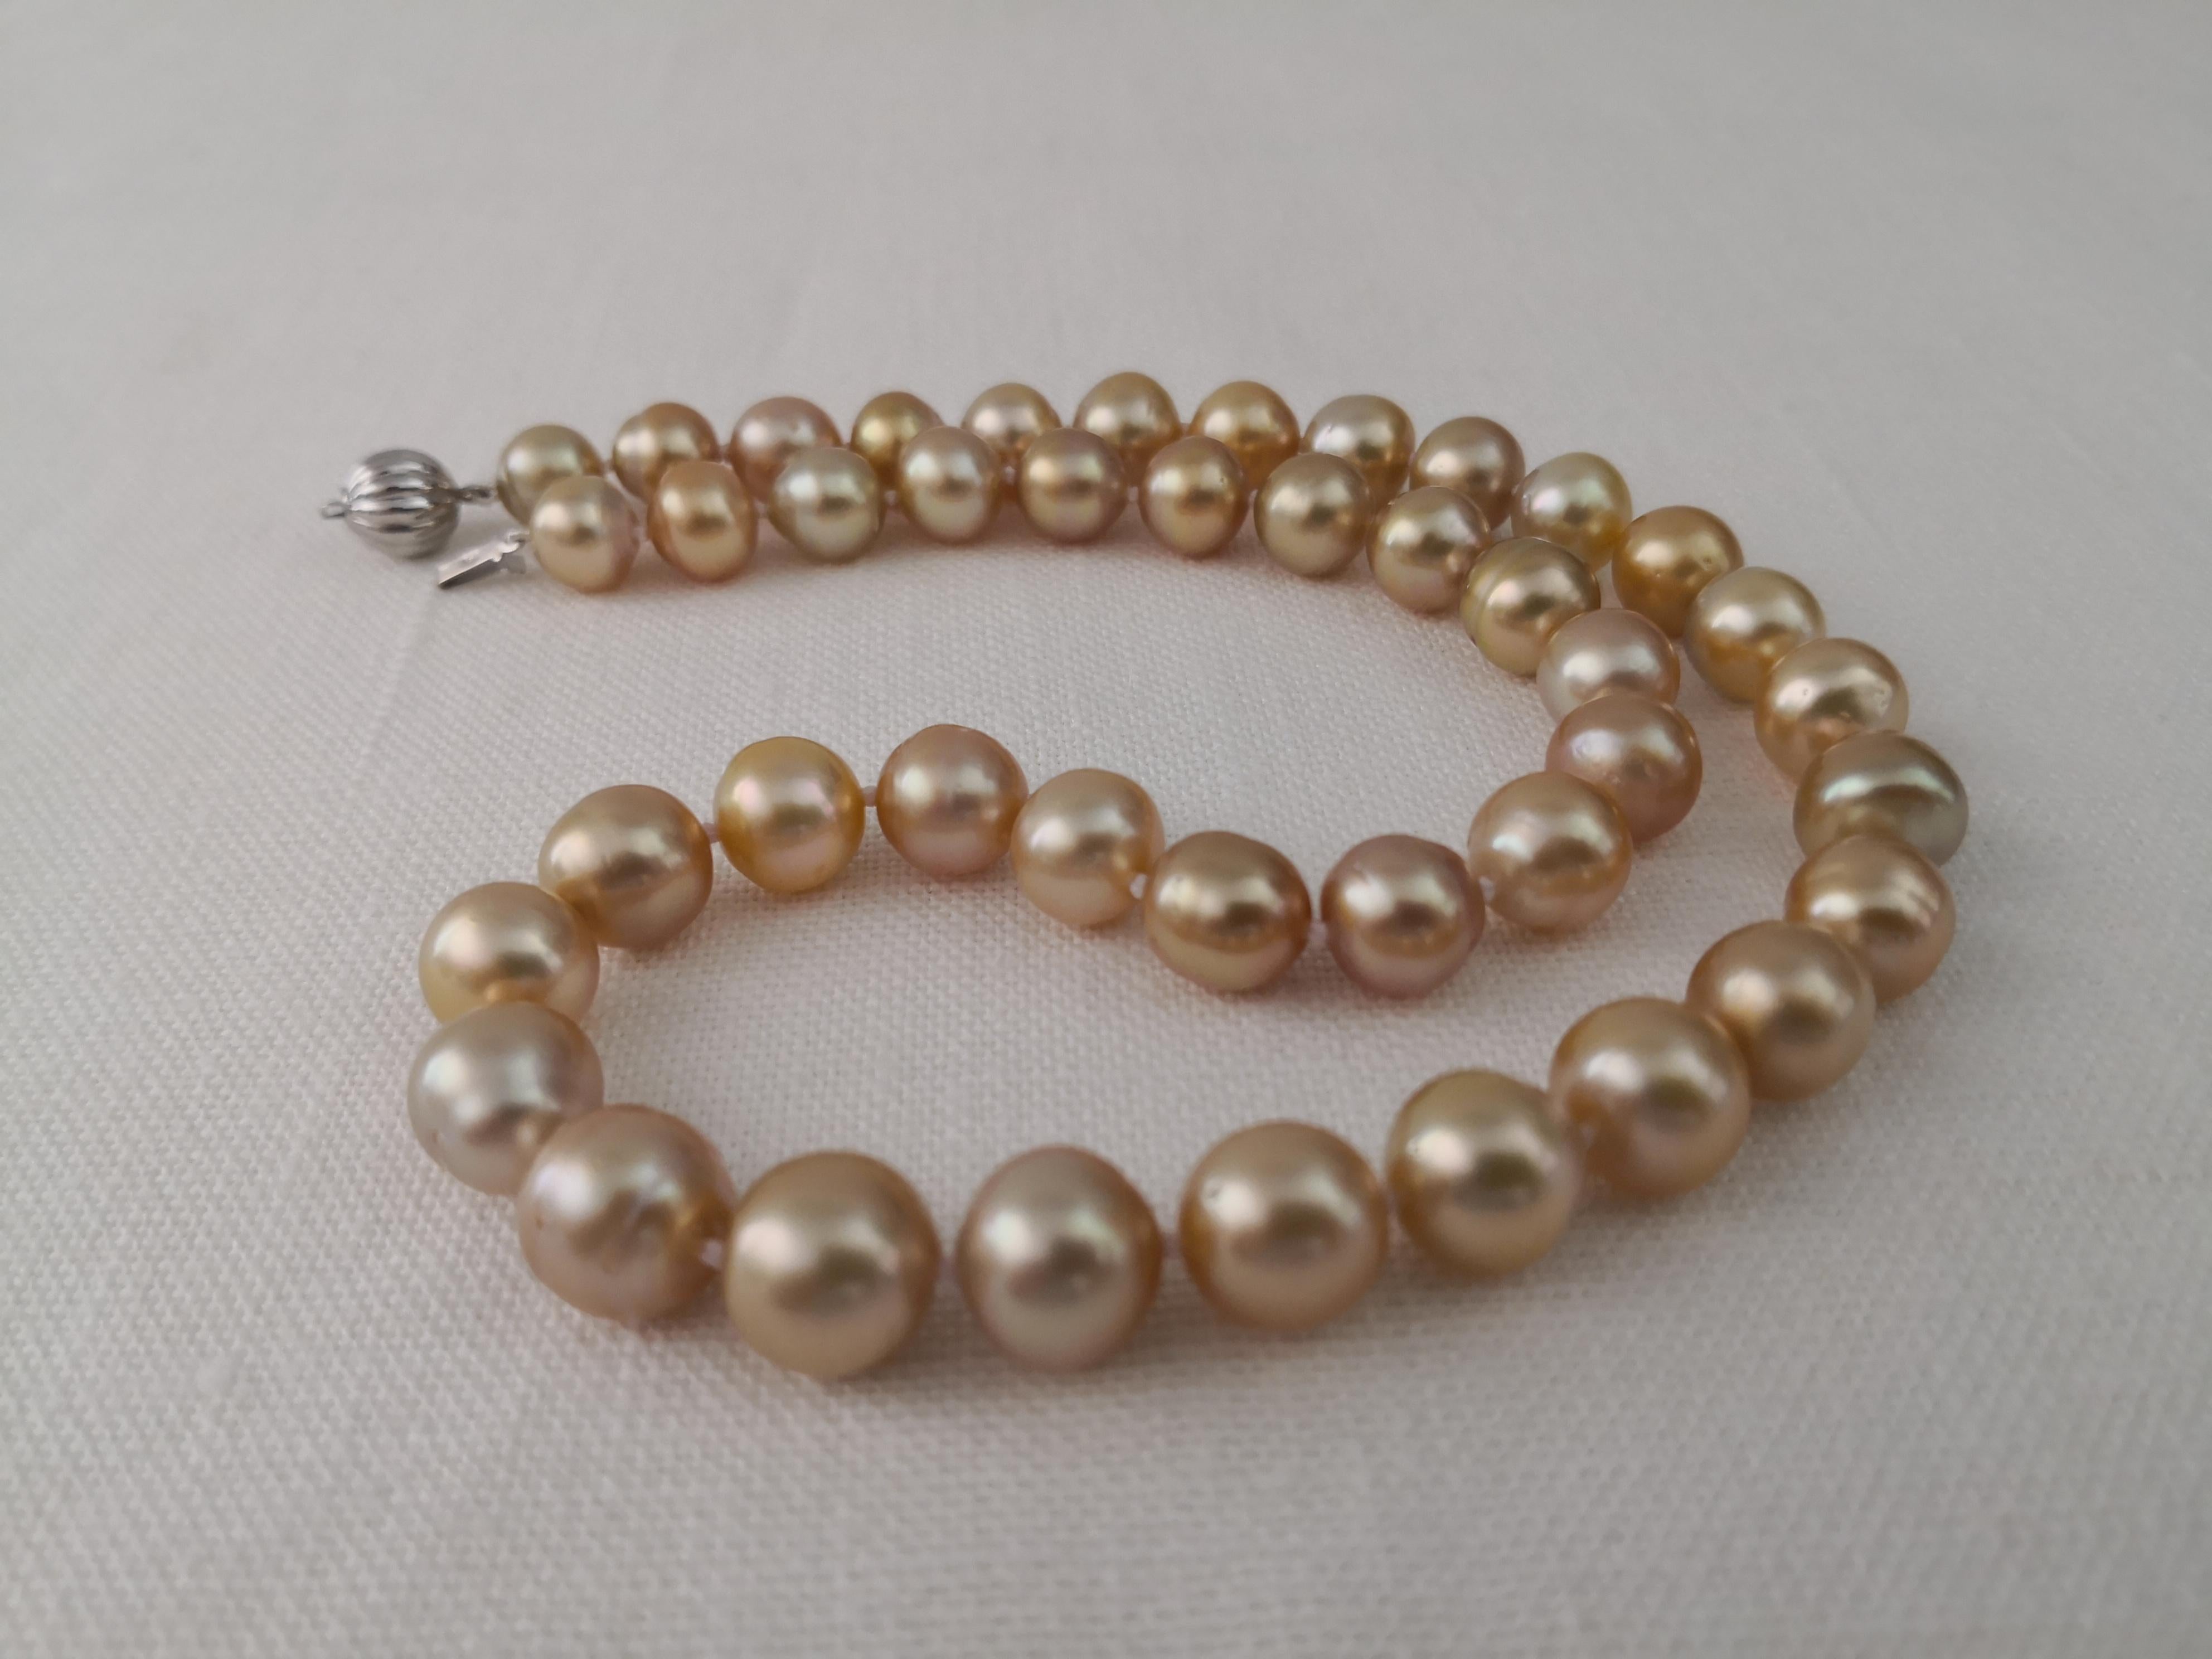 Natural Color South Sea Pearls, from Indonesia ocean waters.

- Size of Pearls 10-11 mm of diameter

- Pearls from Pinctada Maxima Oyster

- Origin: Indonesia ocean waters

- Natural  Golden Color and mixed overtones

- High natural luster and